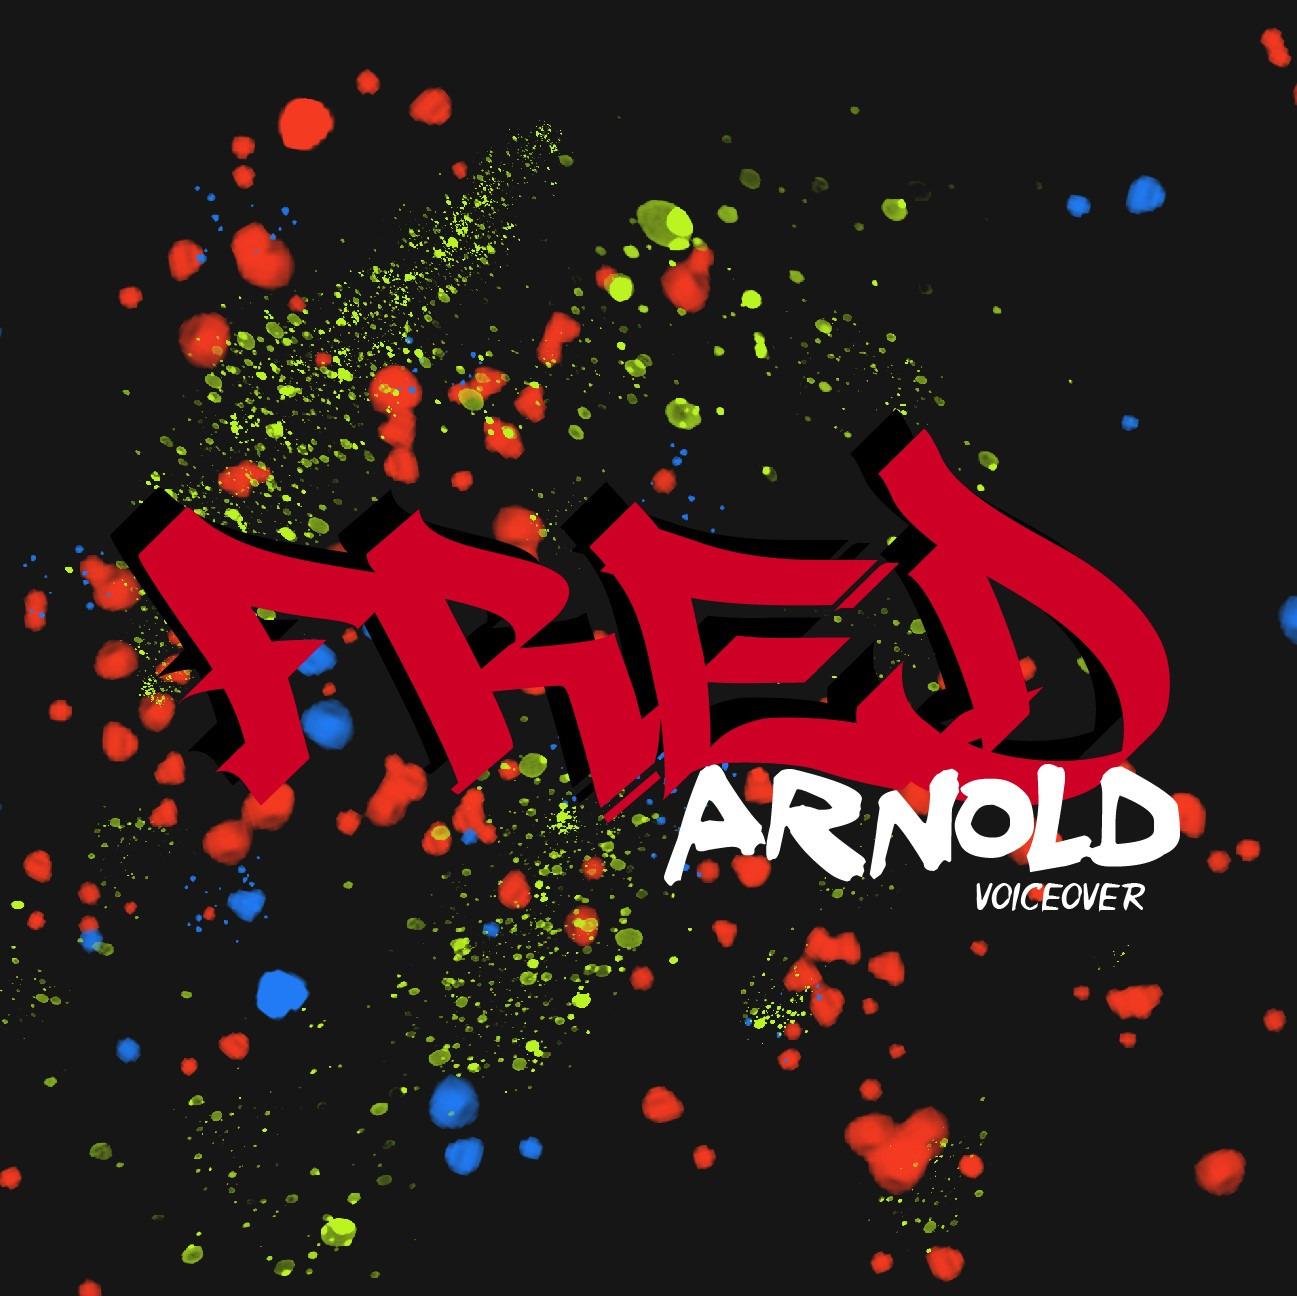 Fred Arnold